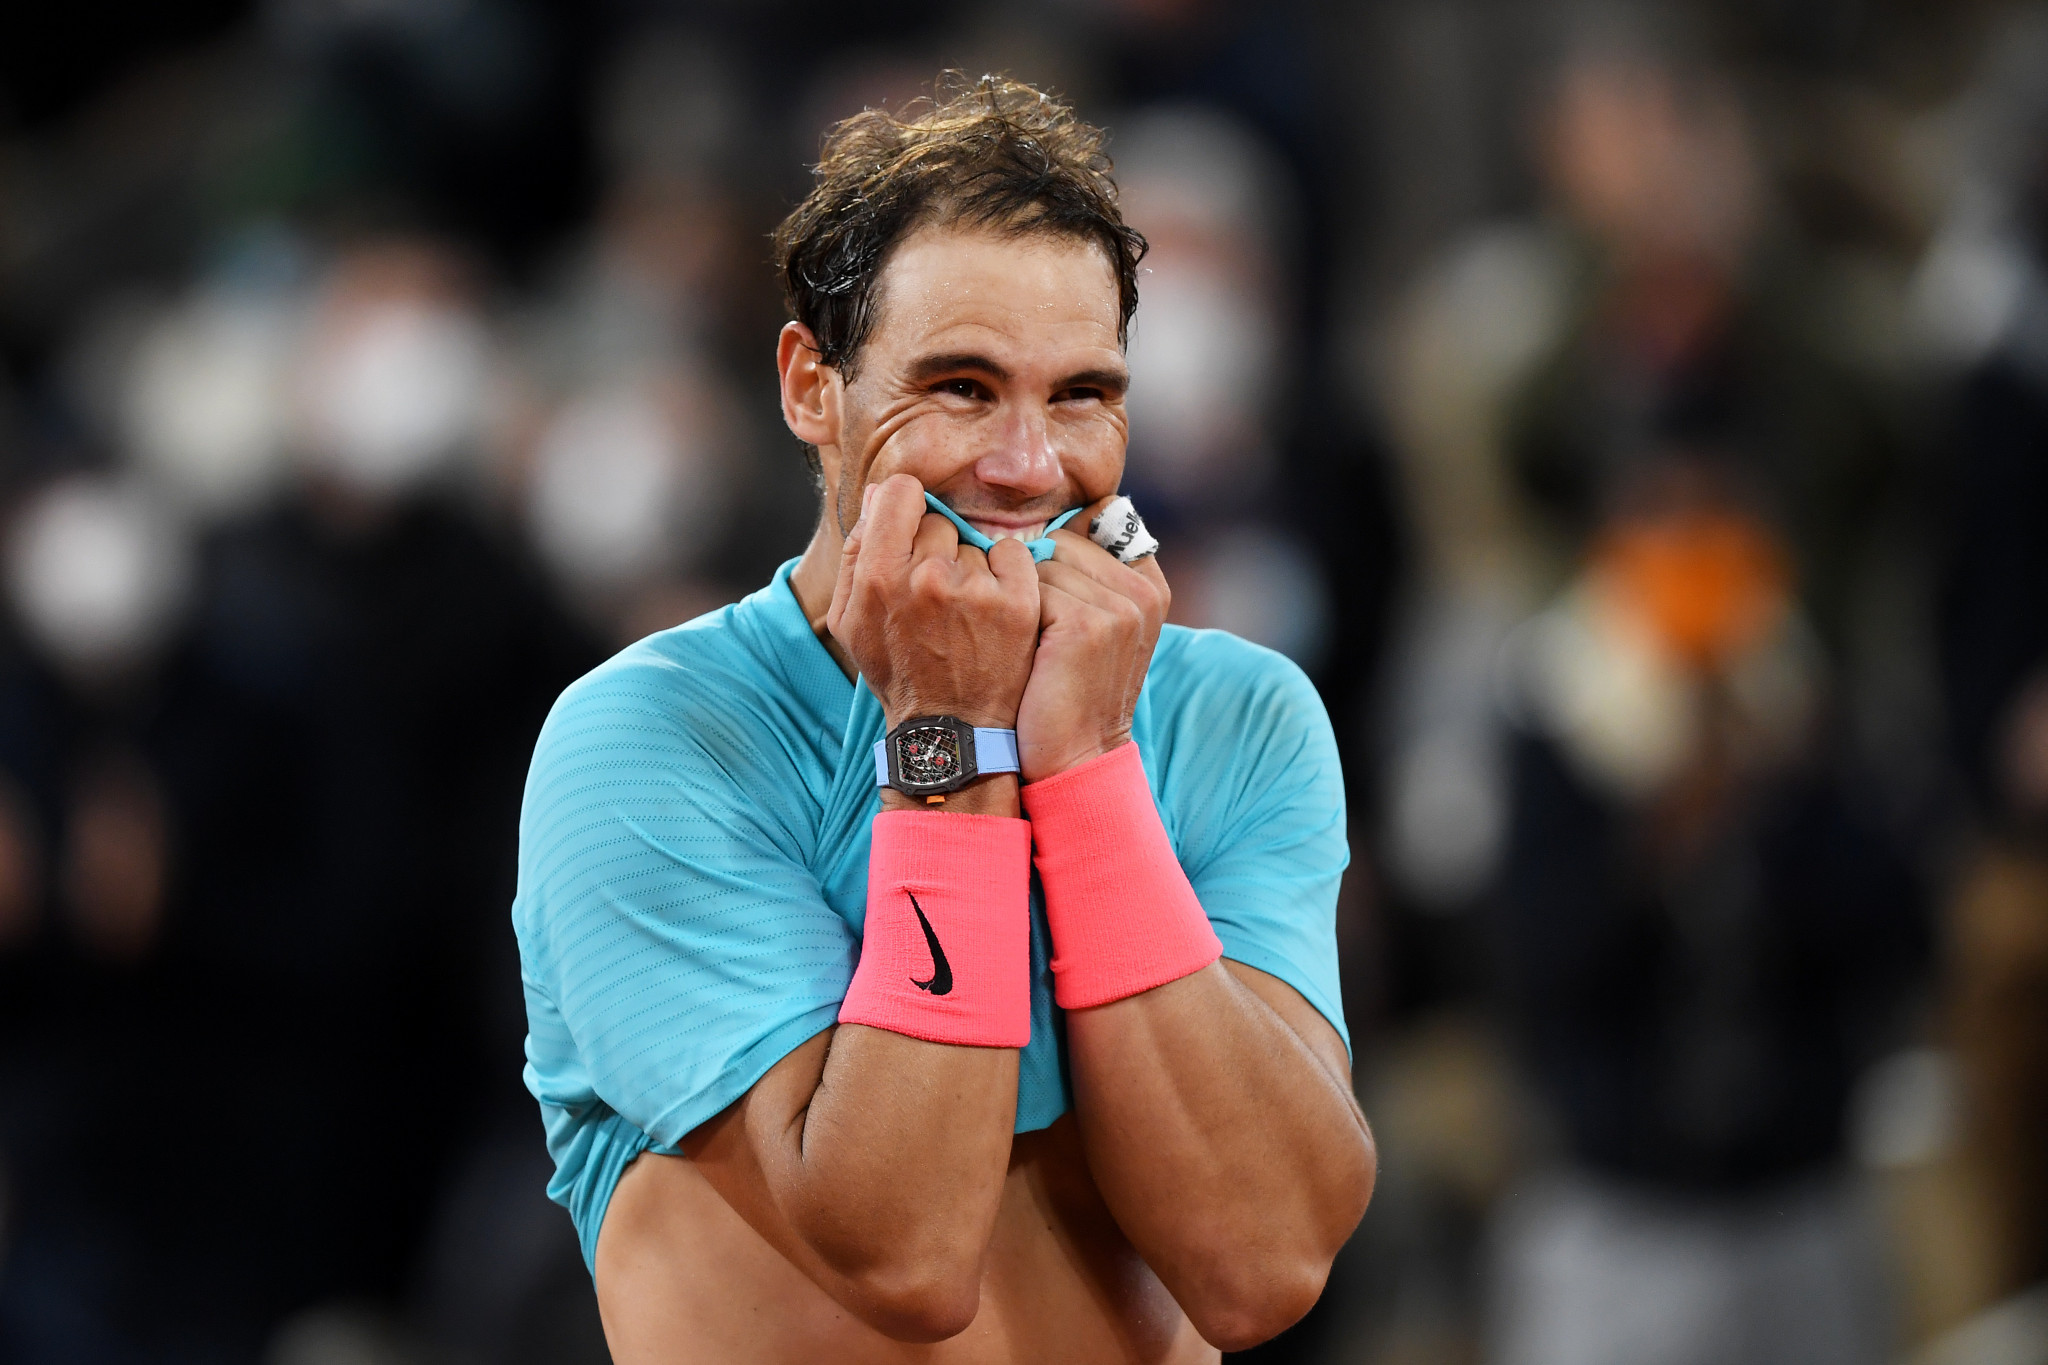 Spain's Nadal celebrates after winning his record-extended 13th French Open title ©Getty Images